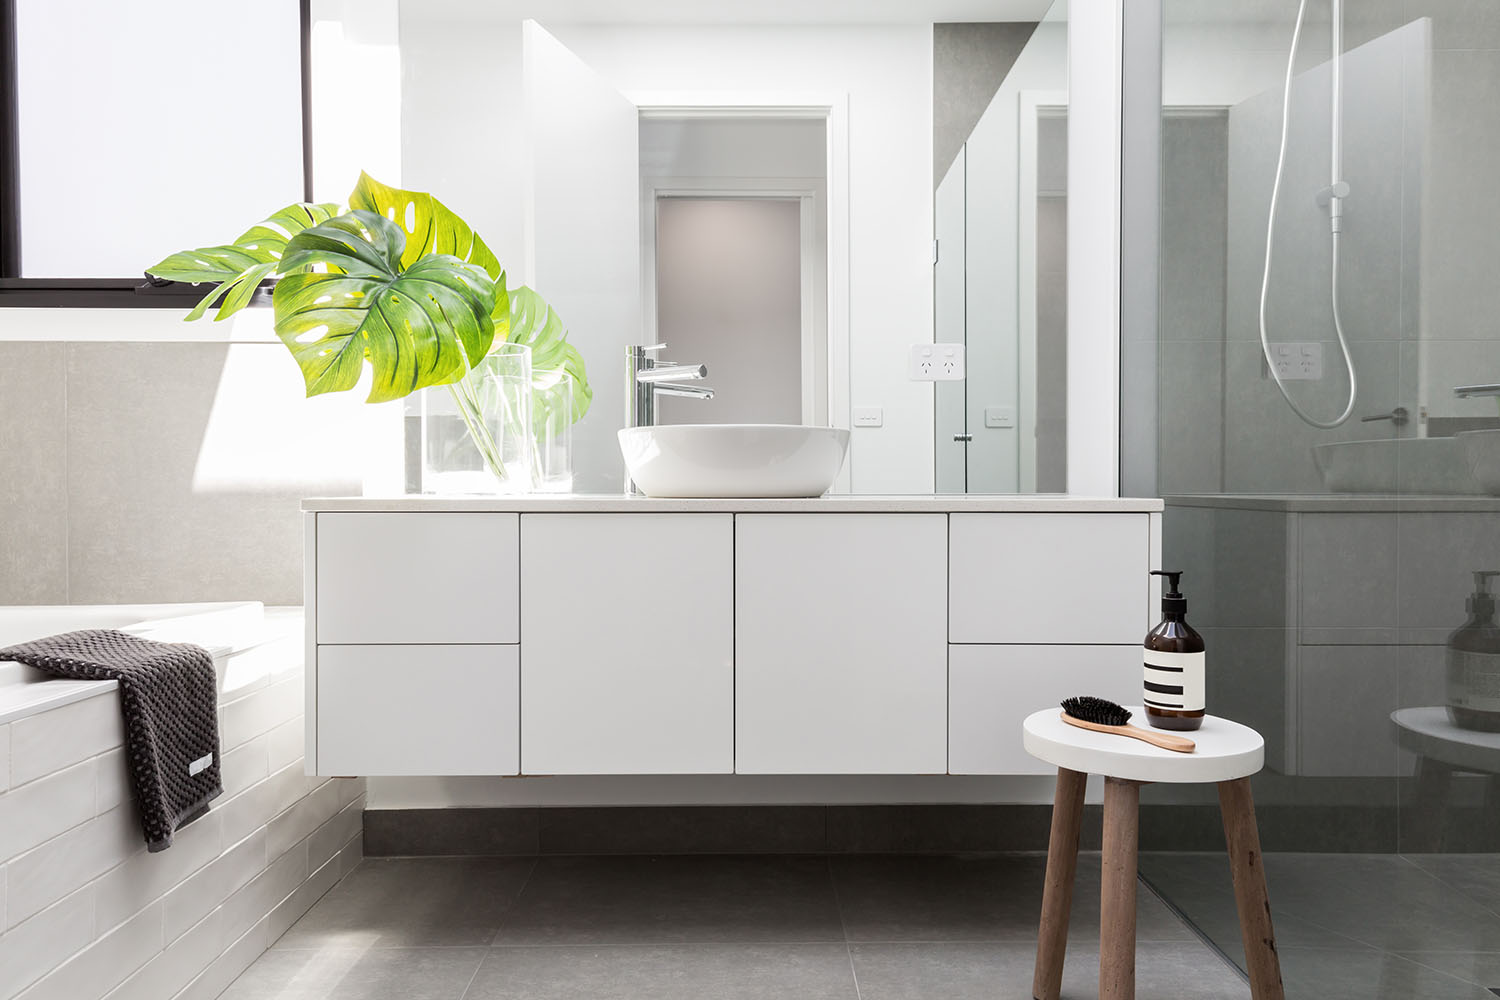 Bathroom Renovations How Much, How Much To Renovate A Small Bathroom Australia